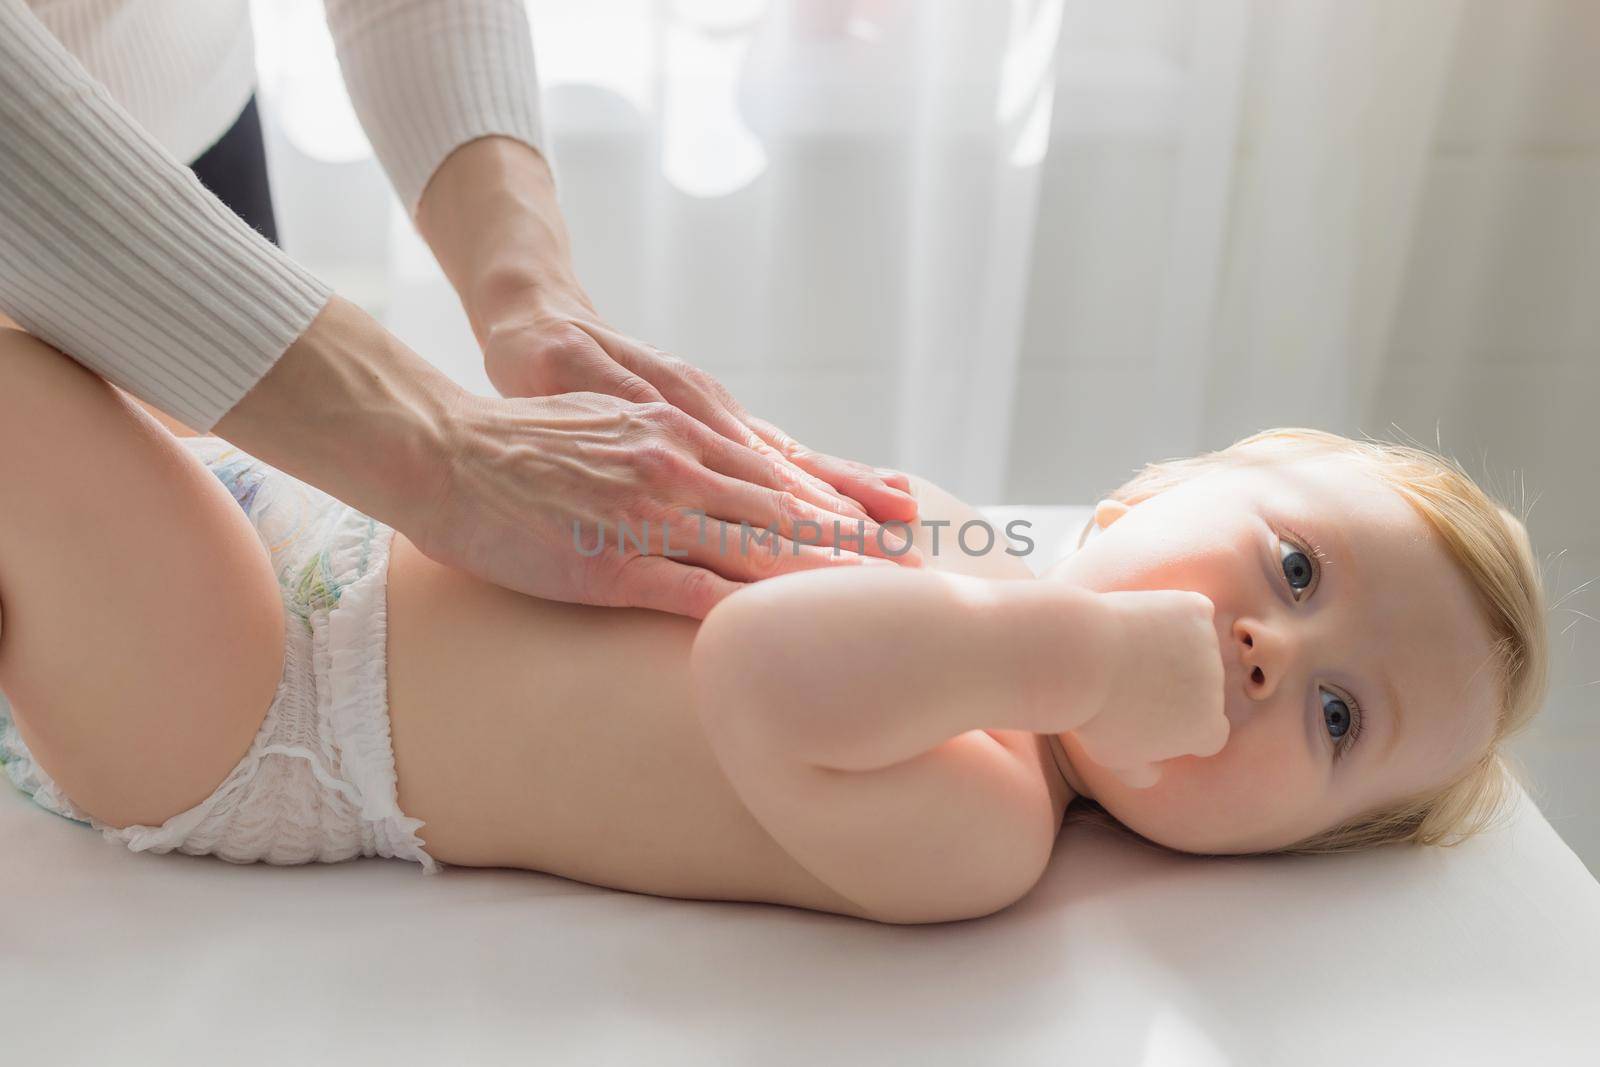 Mom gives her baby a tummy massage. Close-up. A satisfied baby lies on the massage table.